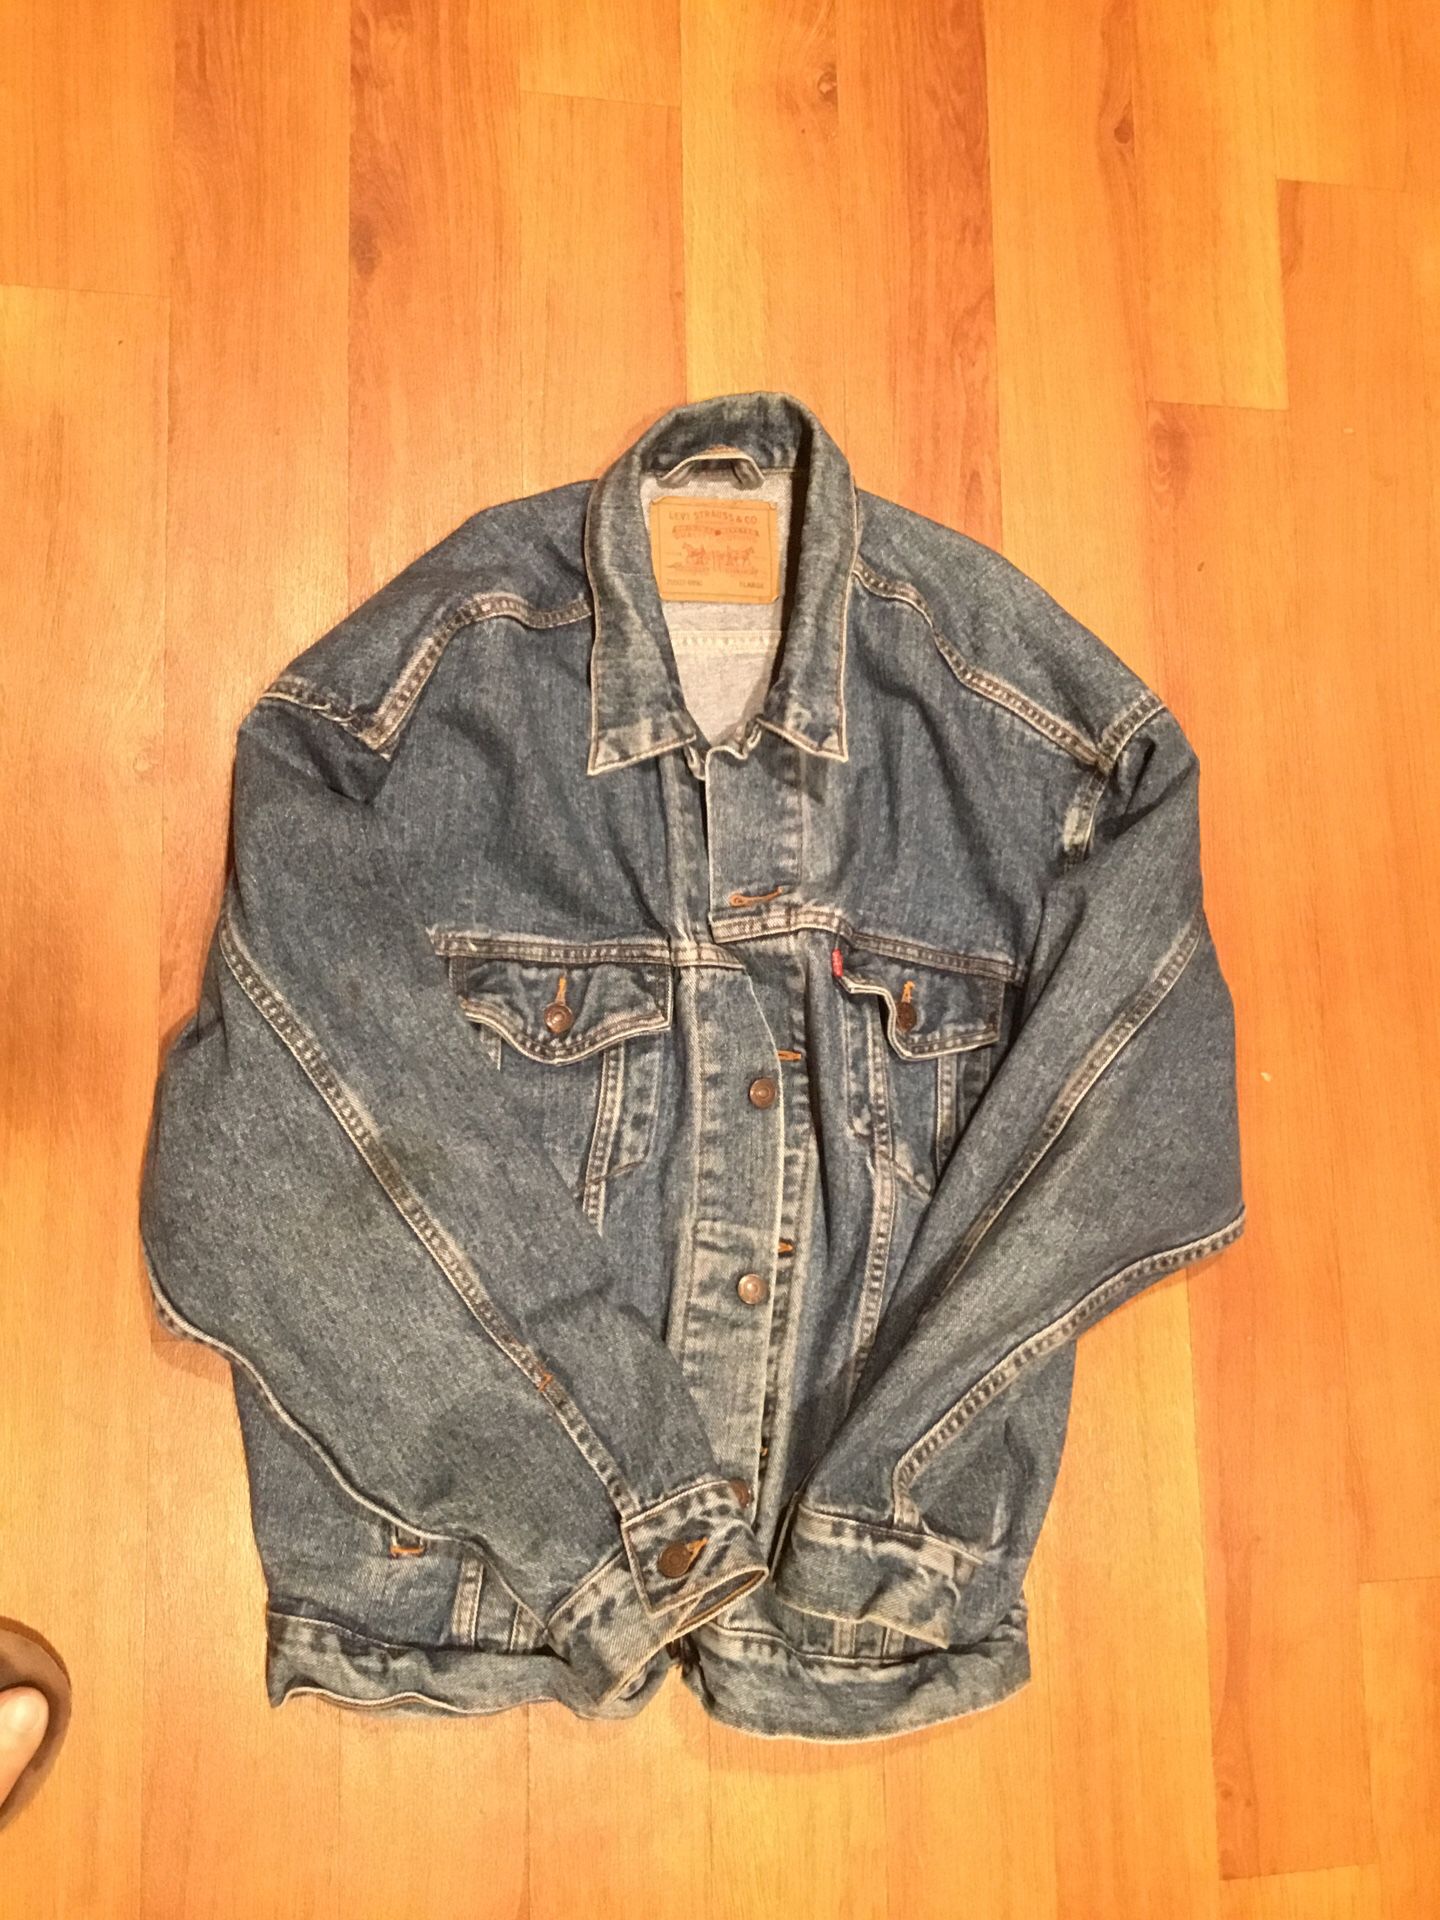 Levi’s Jacket. Worn only 4 times. XLarge